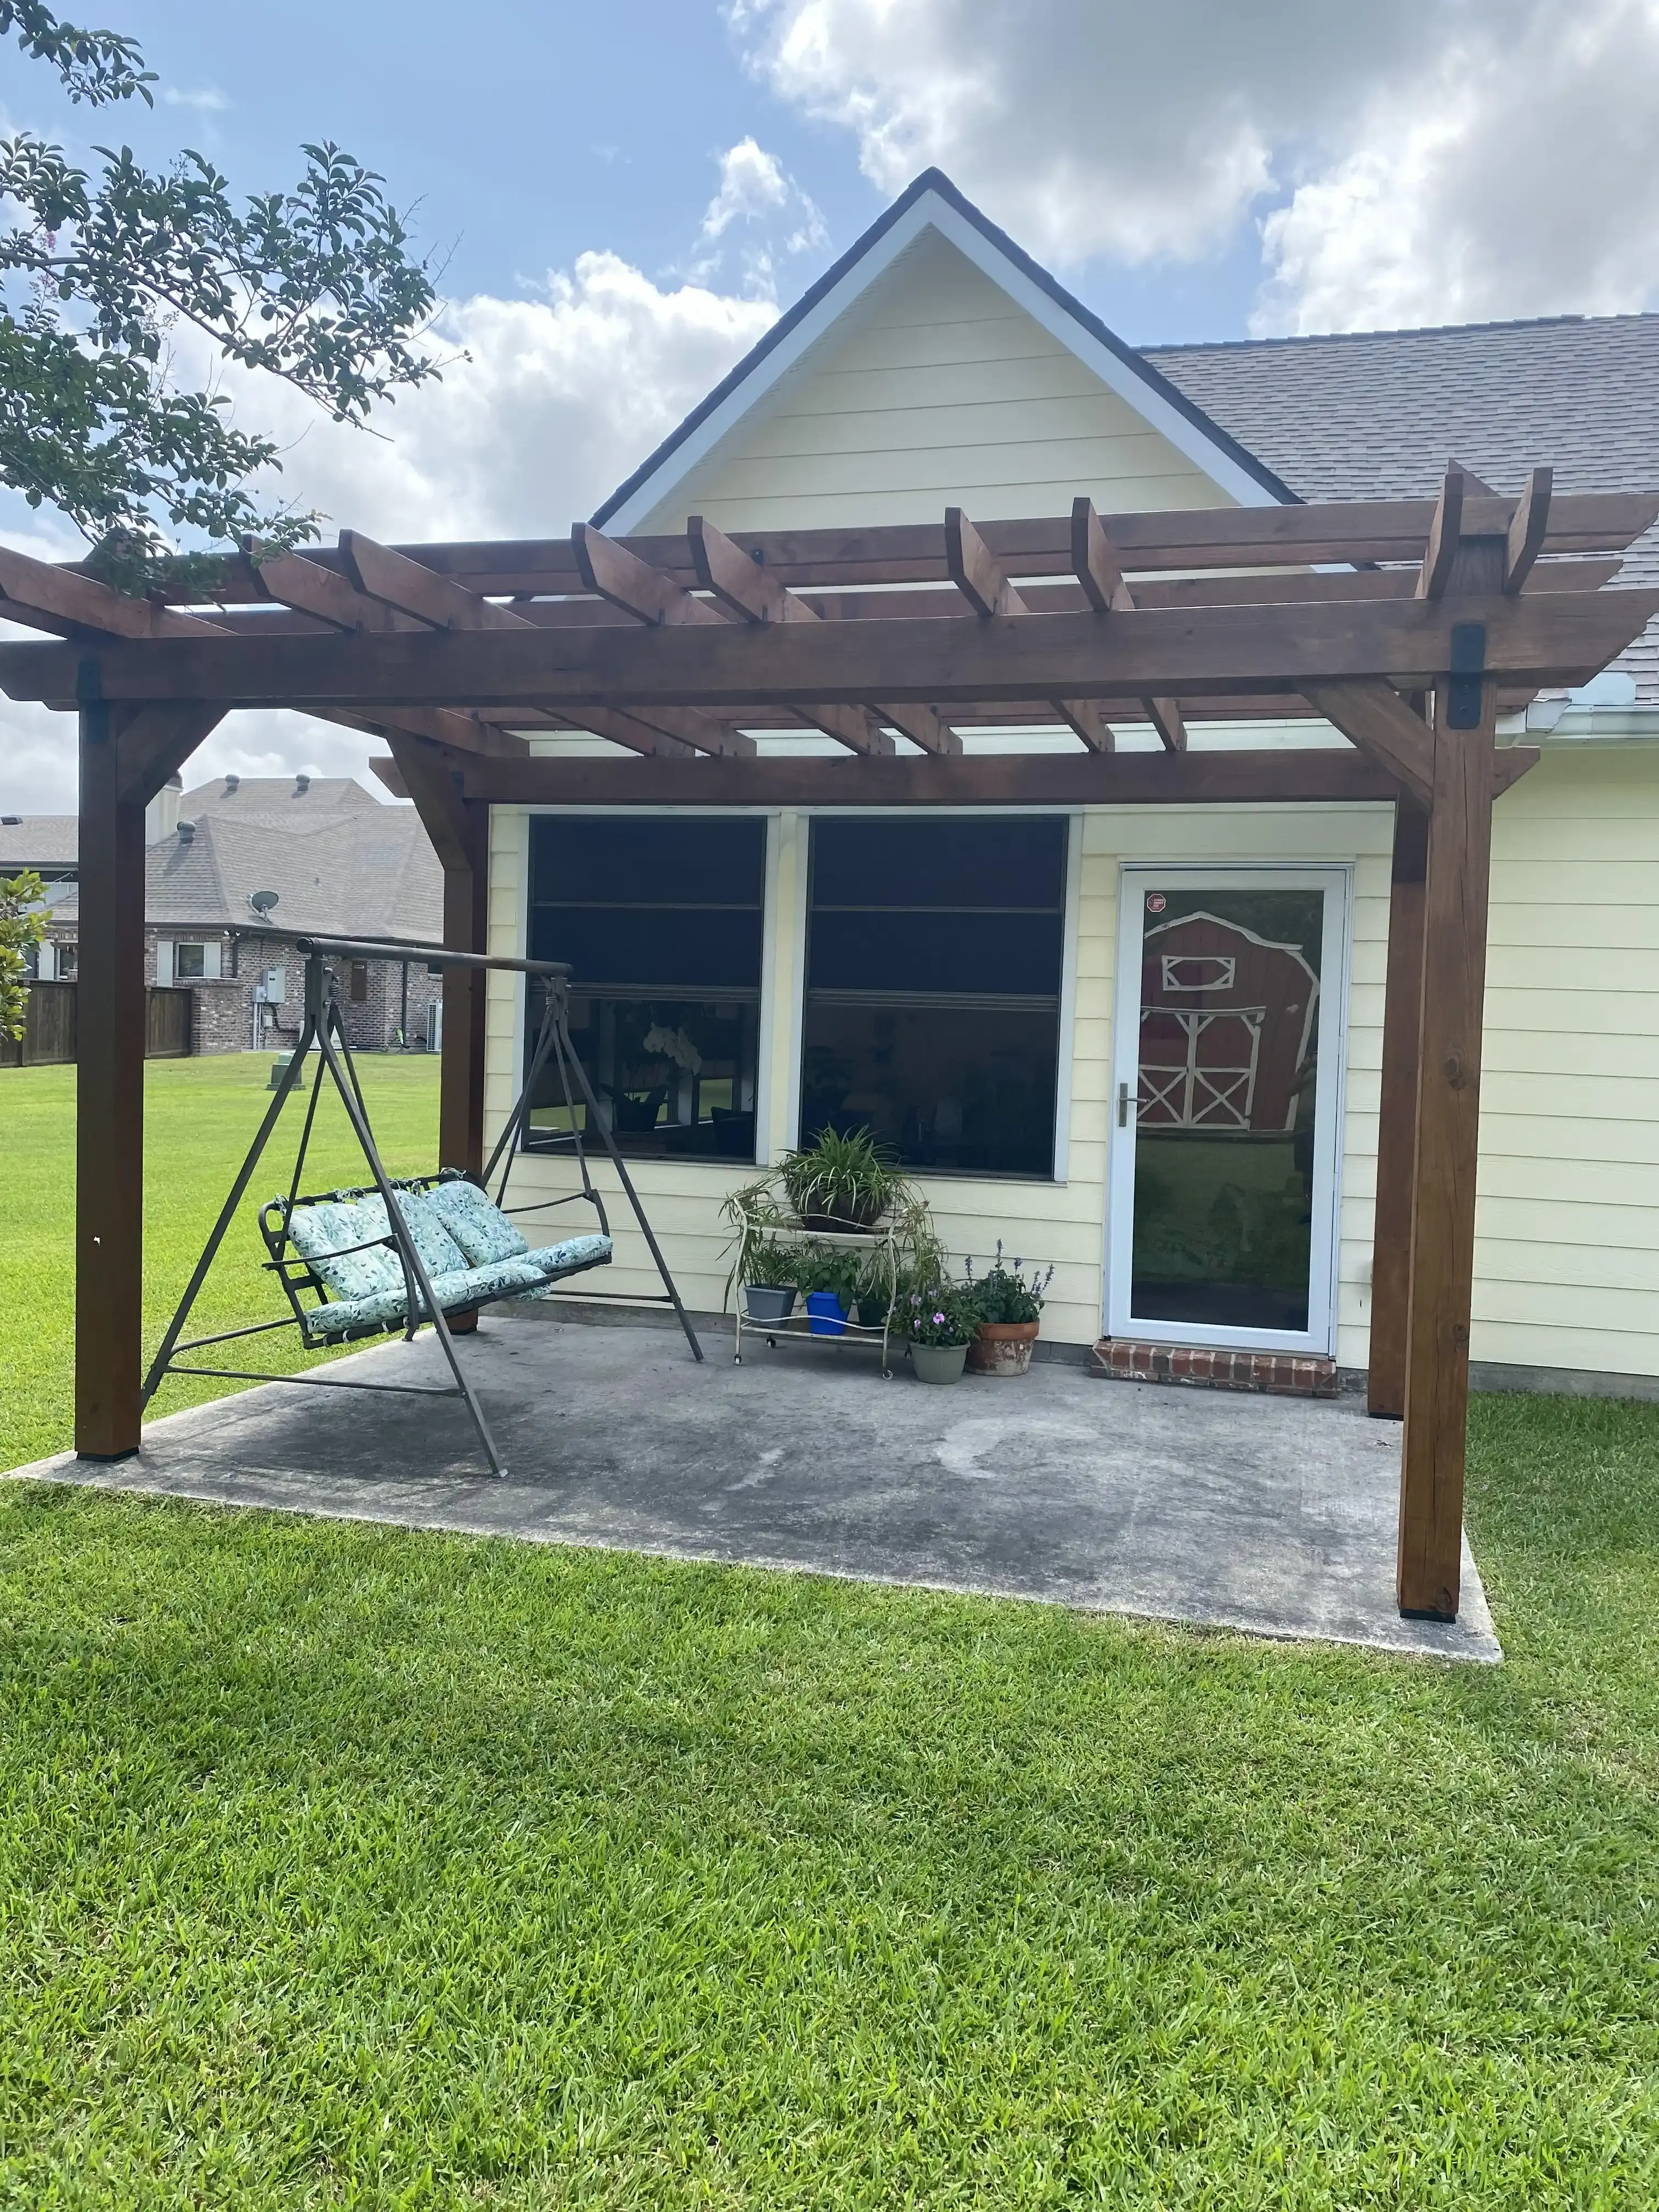 All Photos for Primeaux's Handyman Services in Youngsville, Louisiana